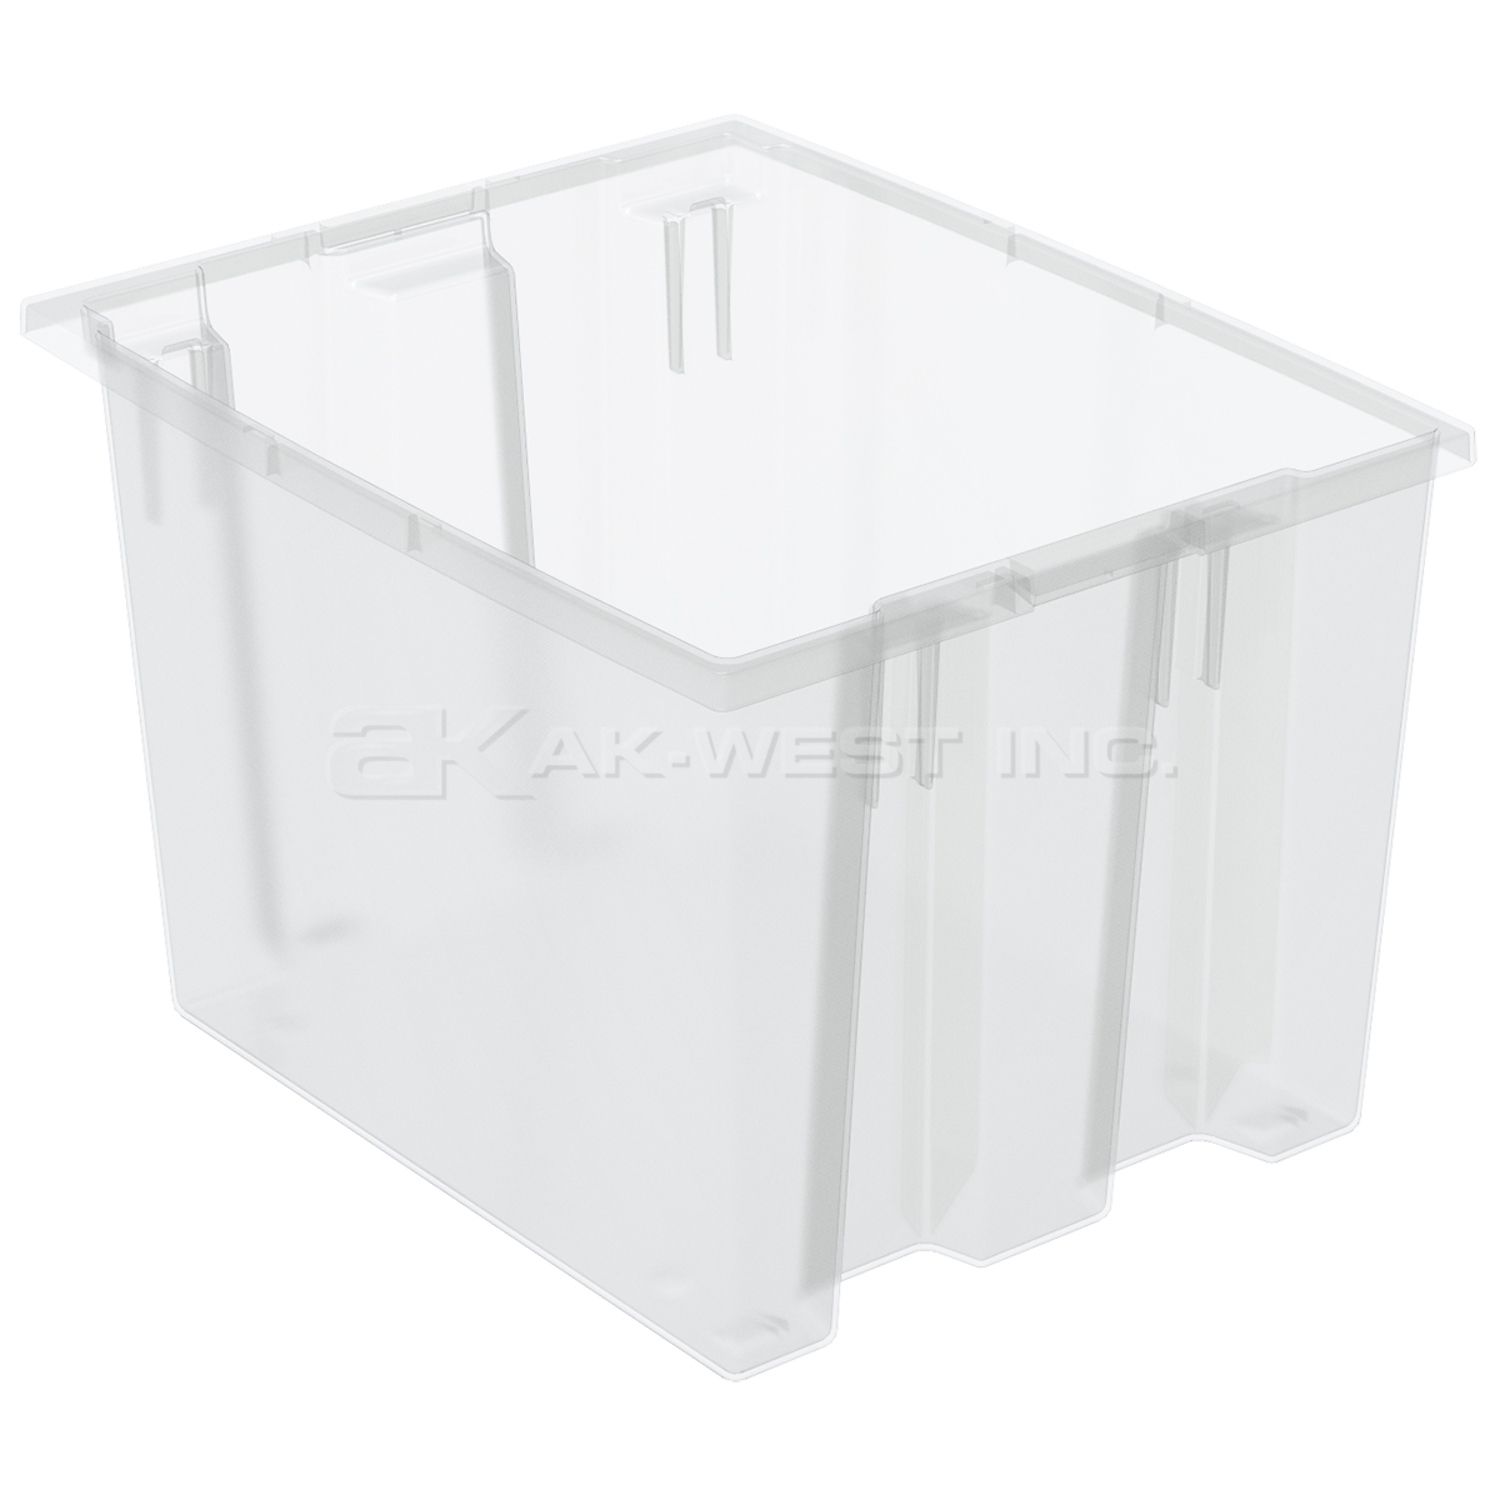 Clear, 19-1/2" x 15-1/2" x 13" Nest and Stack Tote (6 Per Carton)